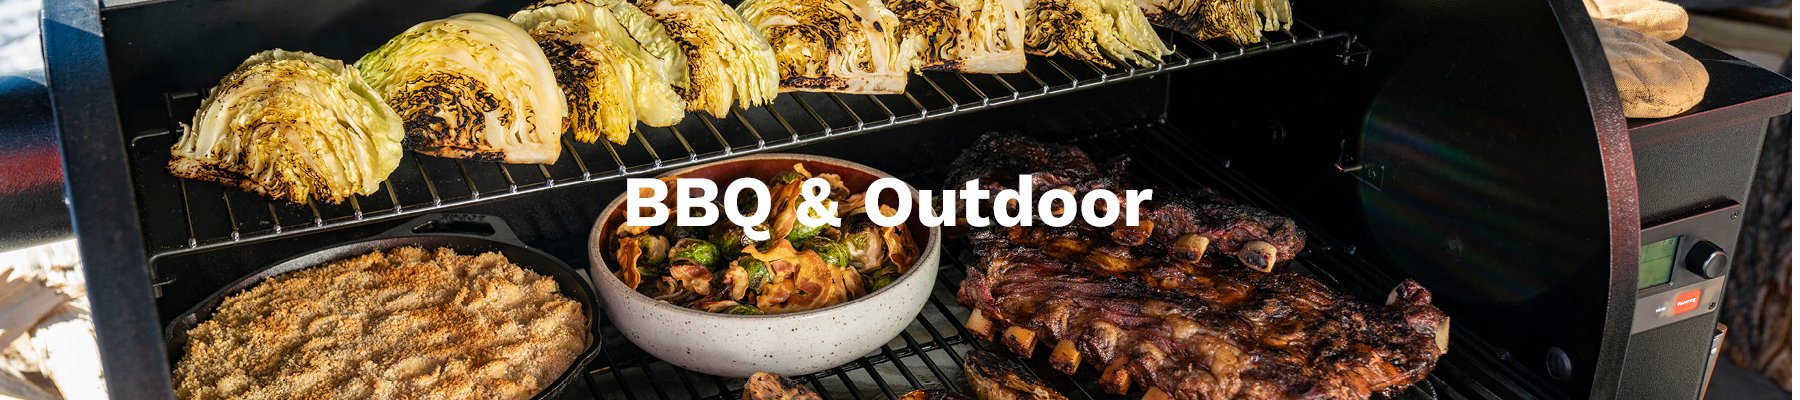 BBQ & Outdoors